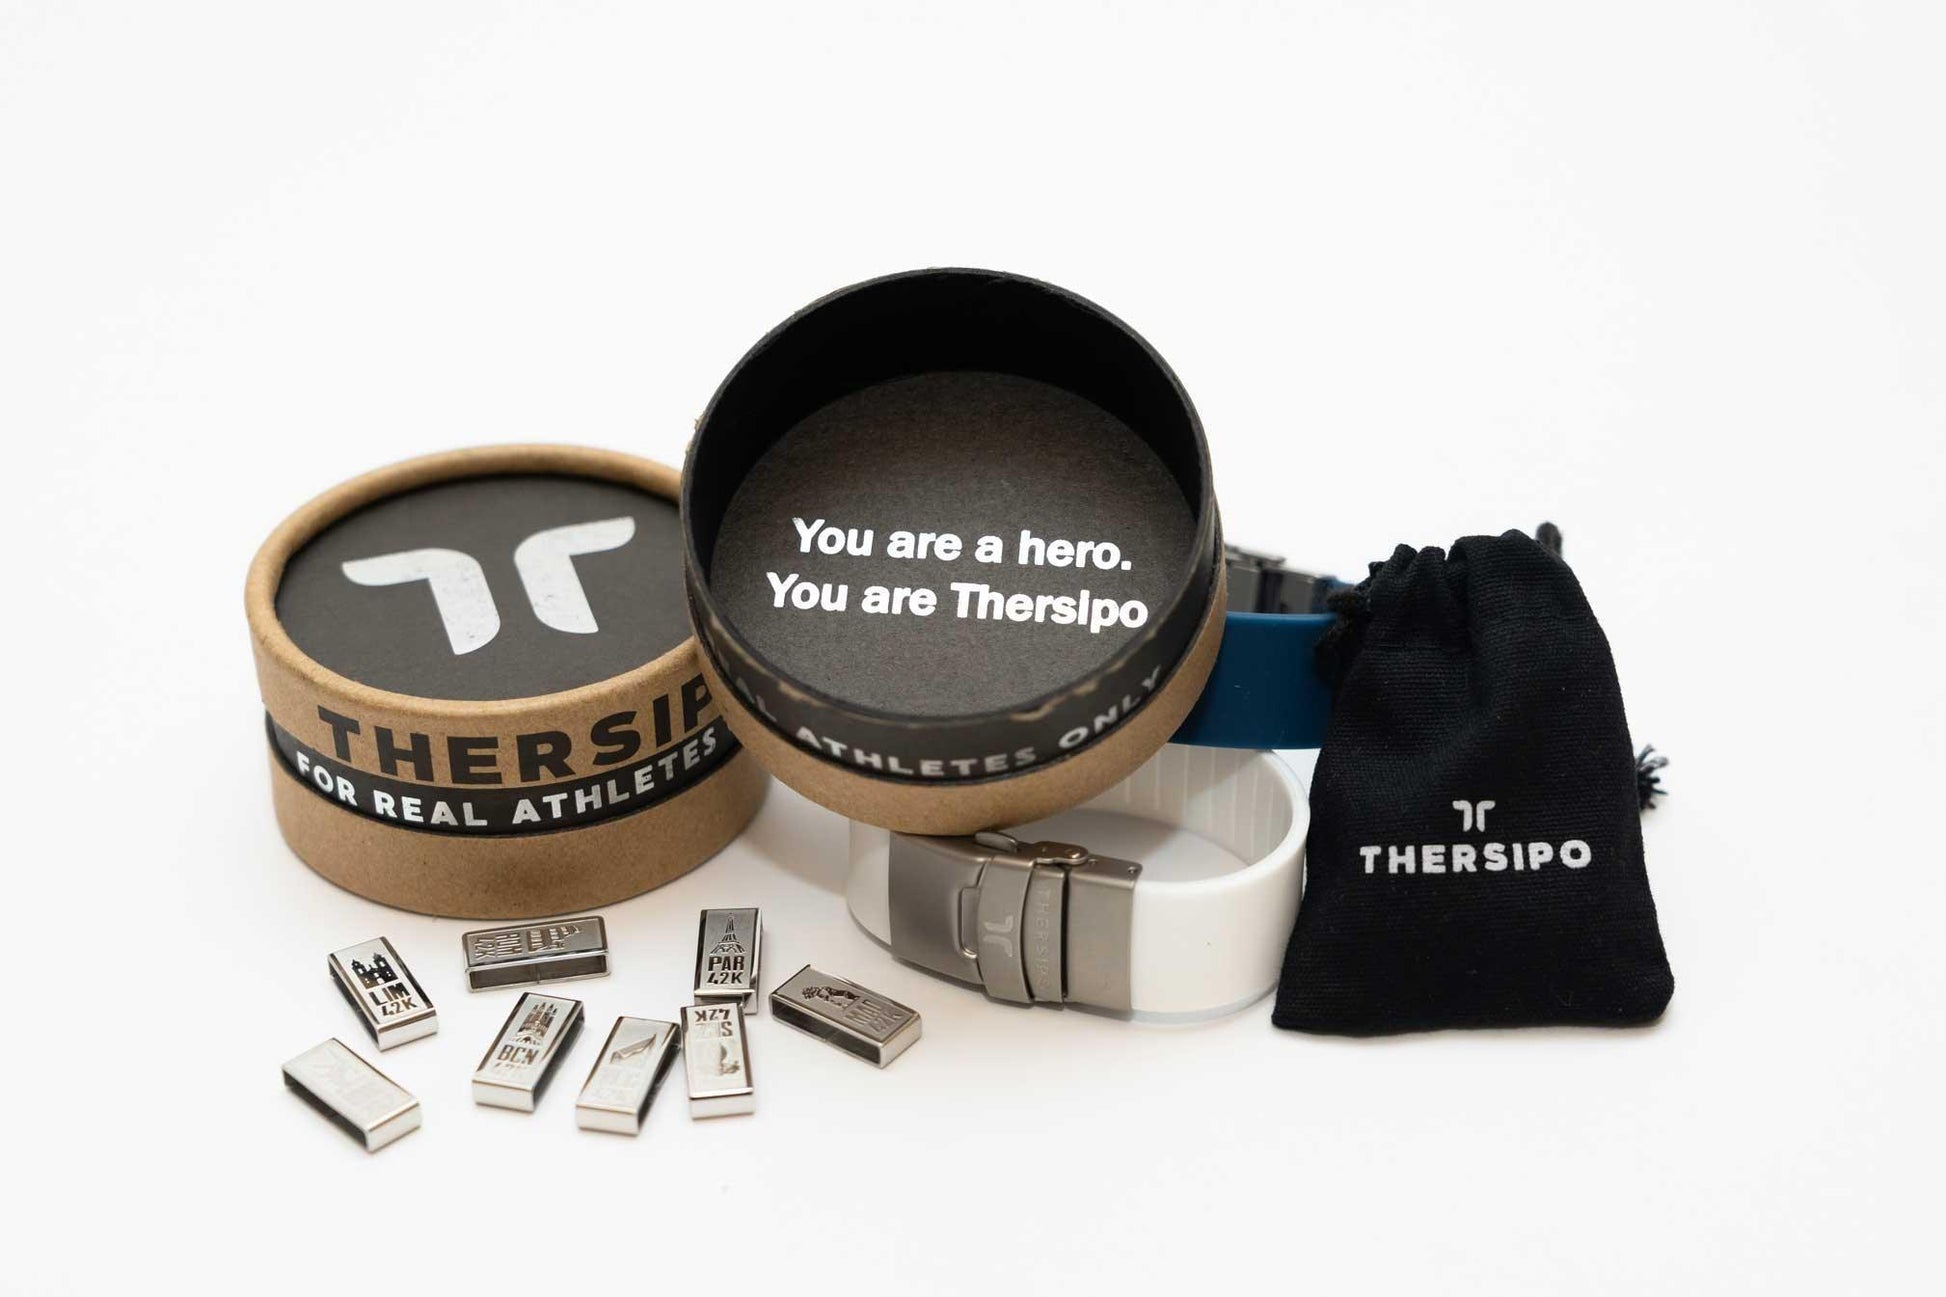 Toronto Edition - Thersipo - Medals - 26.2, 26.2mi, 42, 42k, America, Canada, Canada Marathons, Marathon, Runners, Running, spo-default, spo-disabled, spo-notify-me-disabled, summer 2022, Toronto - The perfect gift for marathon runners